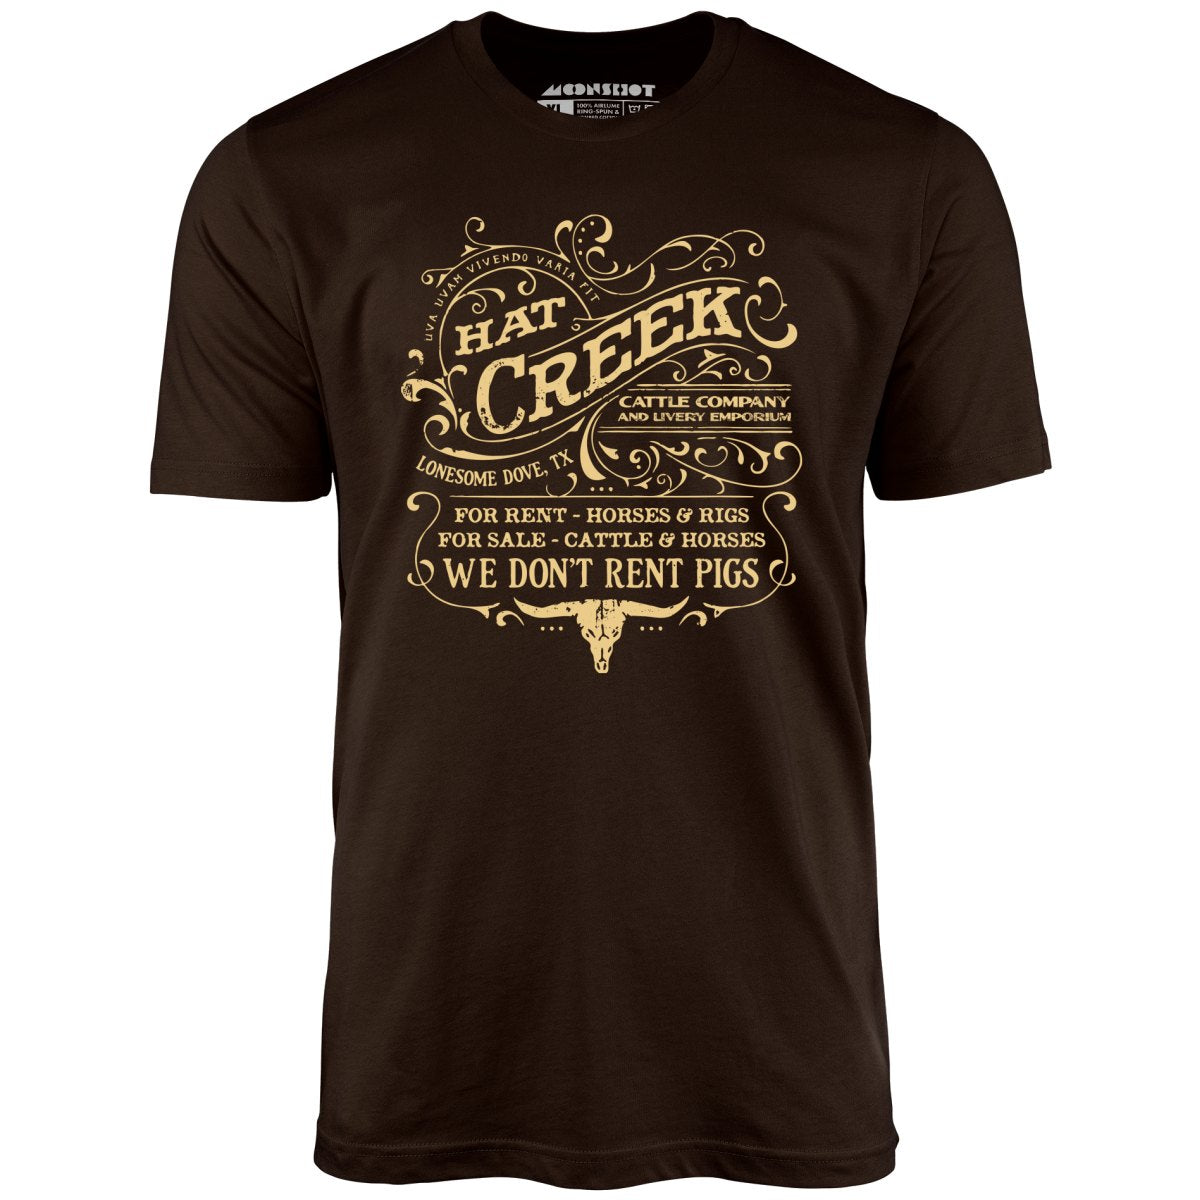 Hat Creek Cattle Company - Lonesome Dove, TX - Unisex T-Shirt